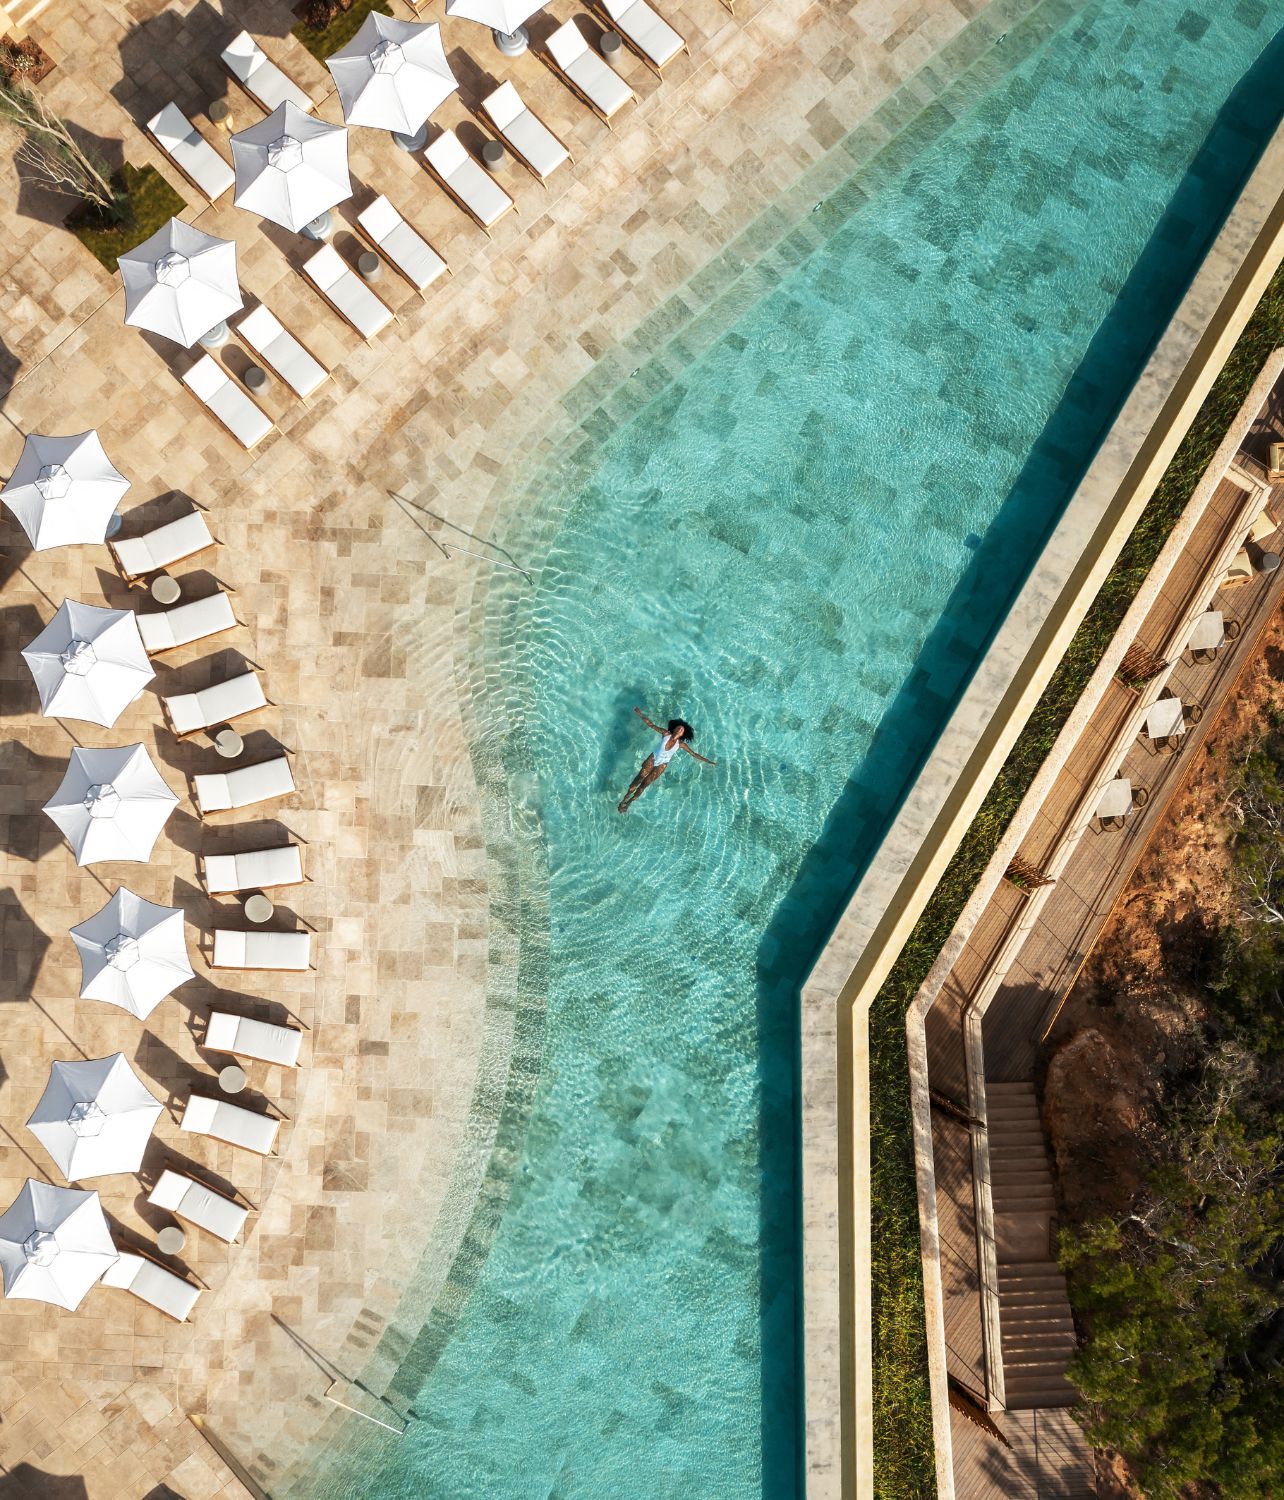 The pool at Six Senses, designed for both socializing and seclusion.